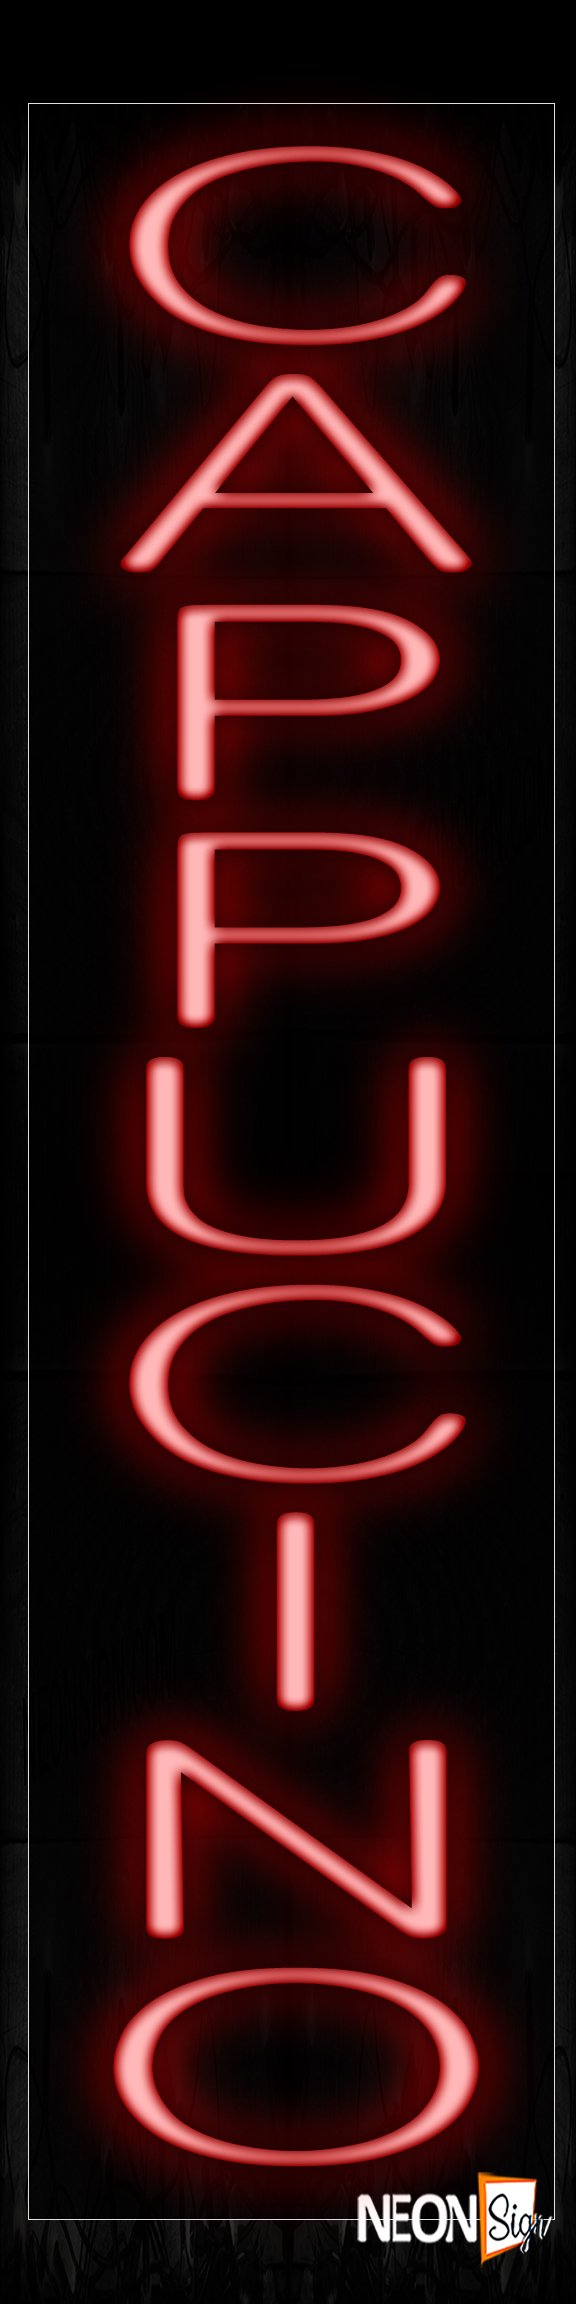 Image of 12210 Cappuccino (Vertical) Neon Signs_8x32 Black Backing